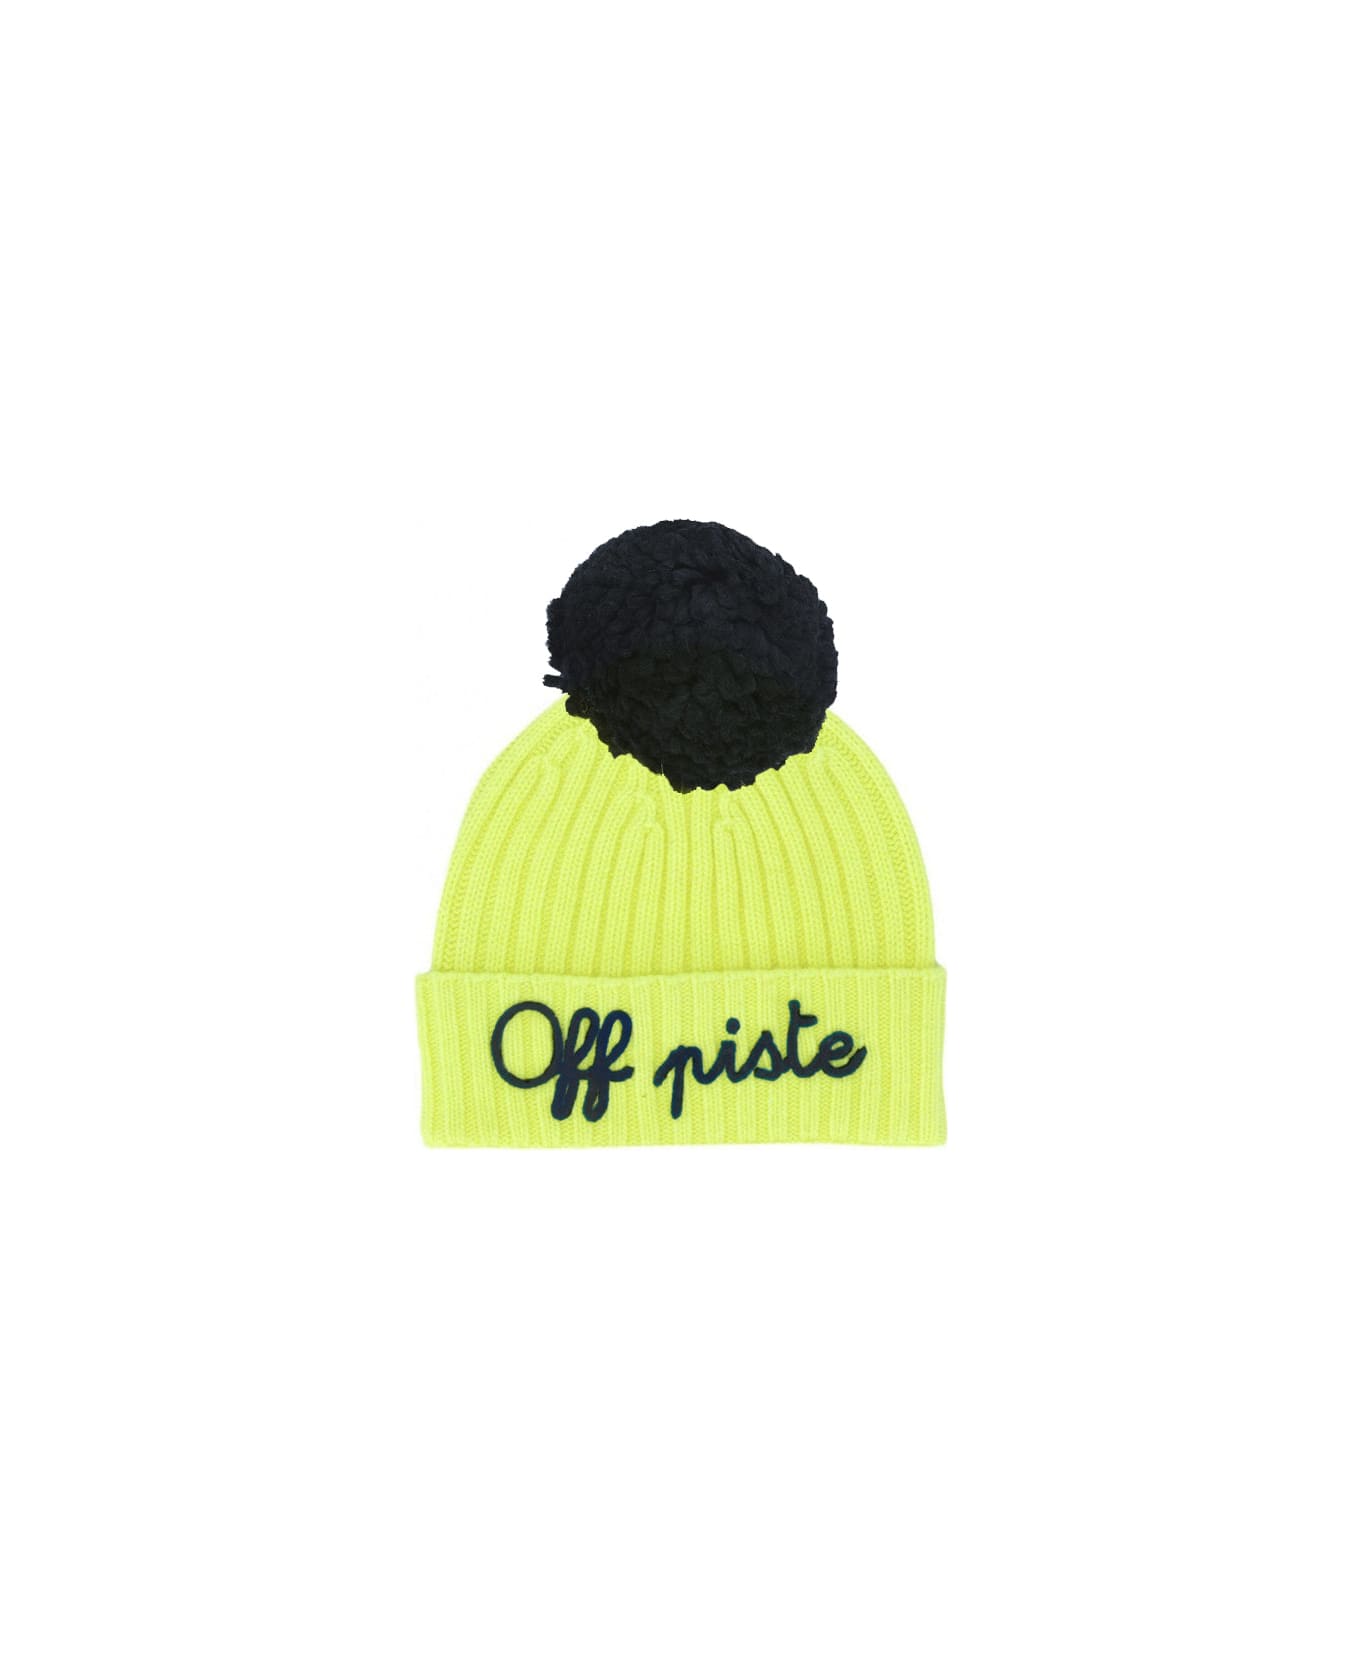 MC2 Saint Barth Kids Cashmere Blended Yellow Fluo Hat Off Piste Embroidery - YELLOW 帽子